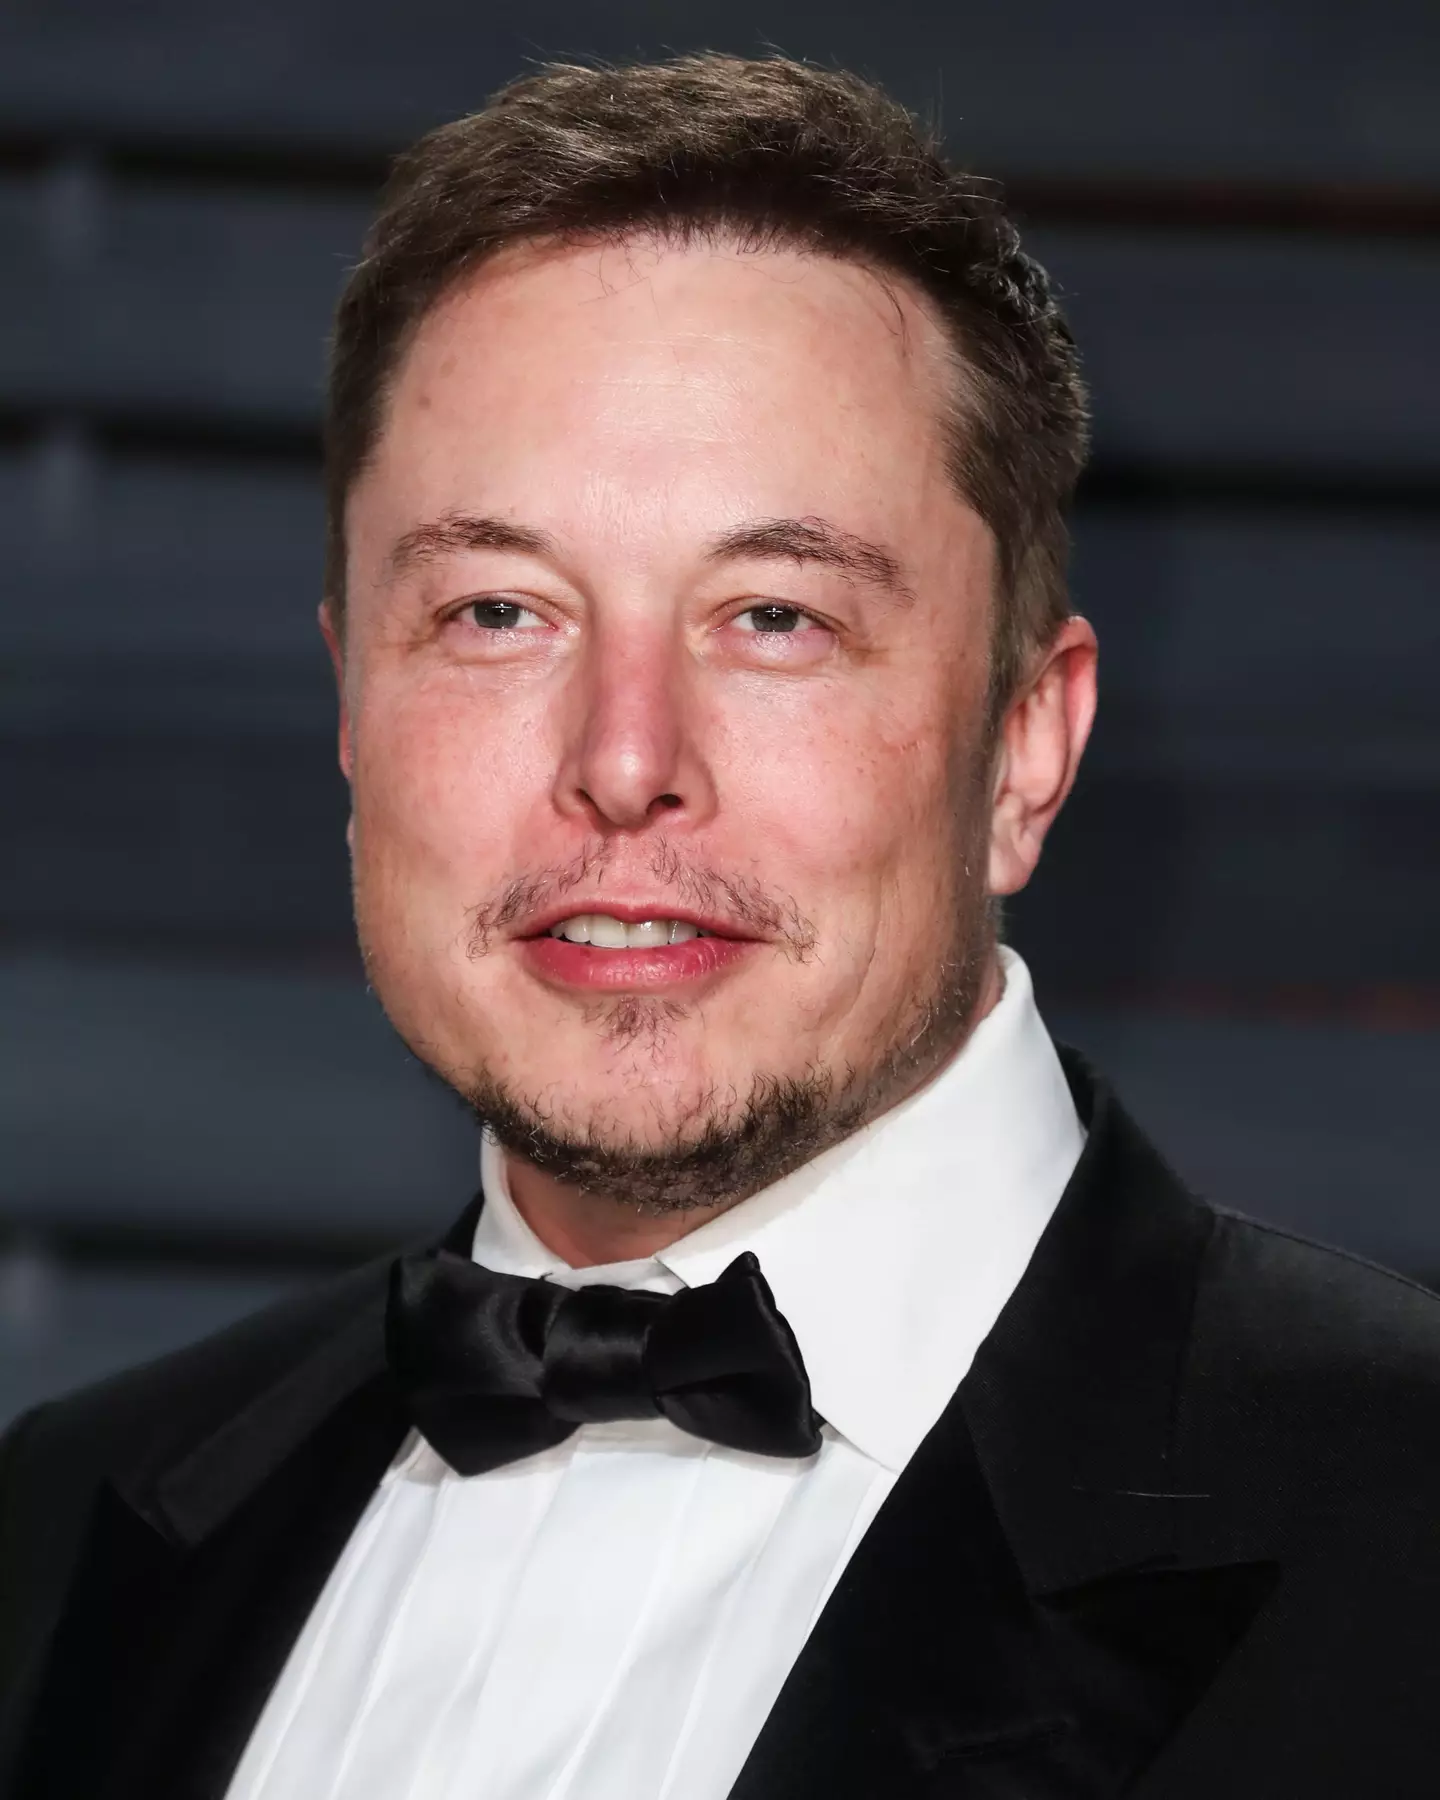 Elon Musk offered the teenager $5,000 to get rid of the account.